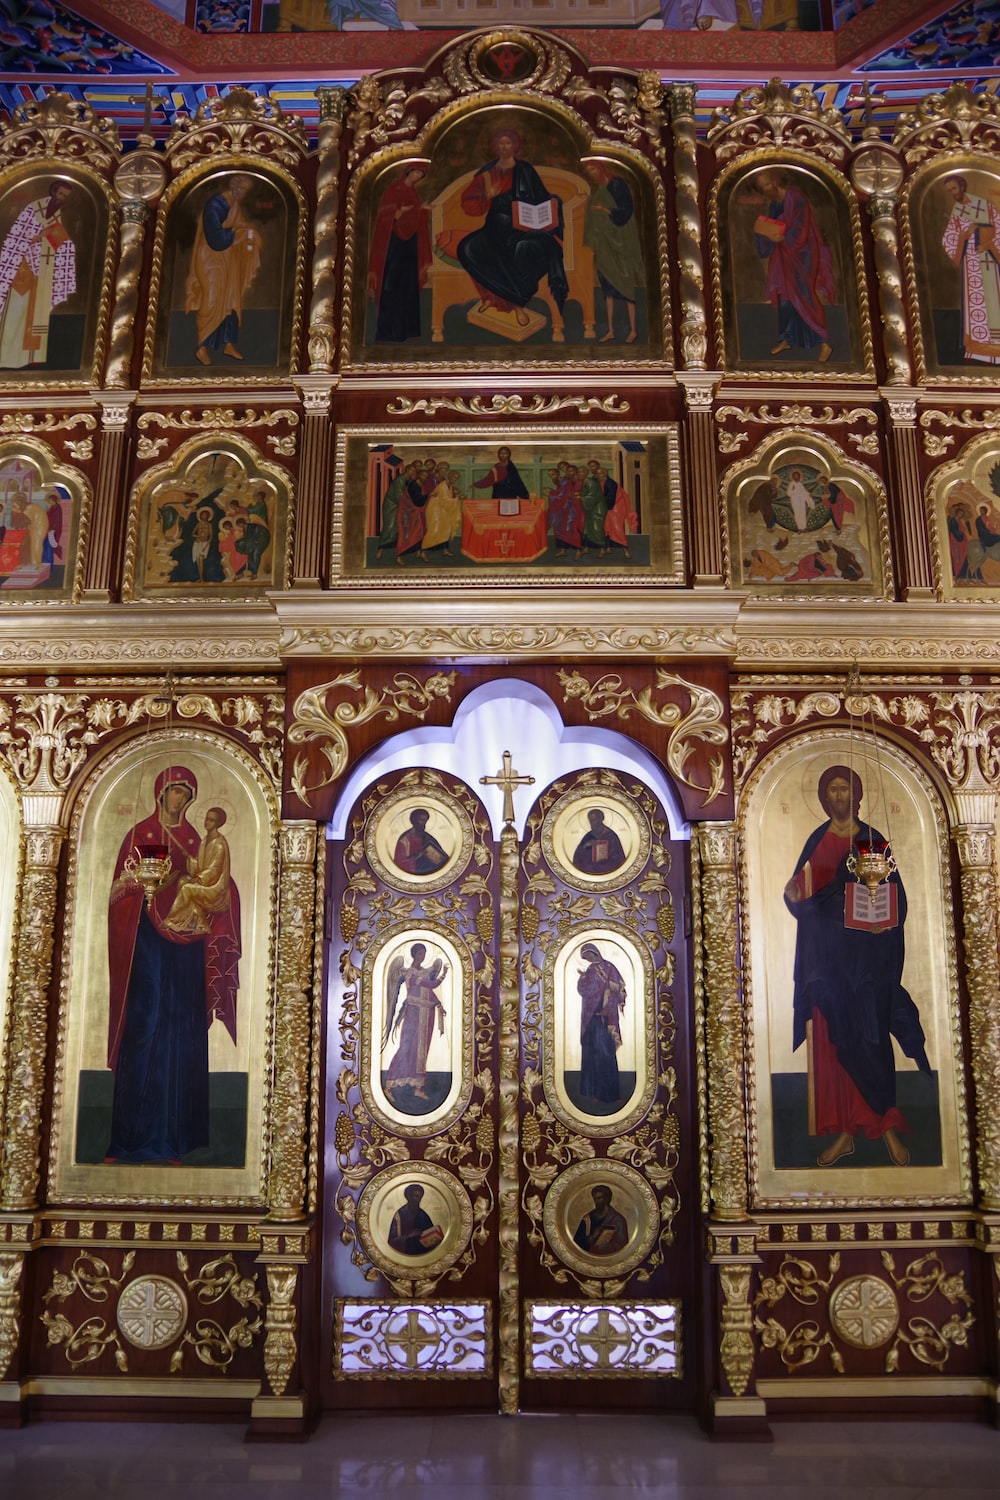 an ornately decorated church with paintings on the walls